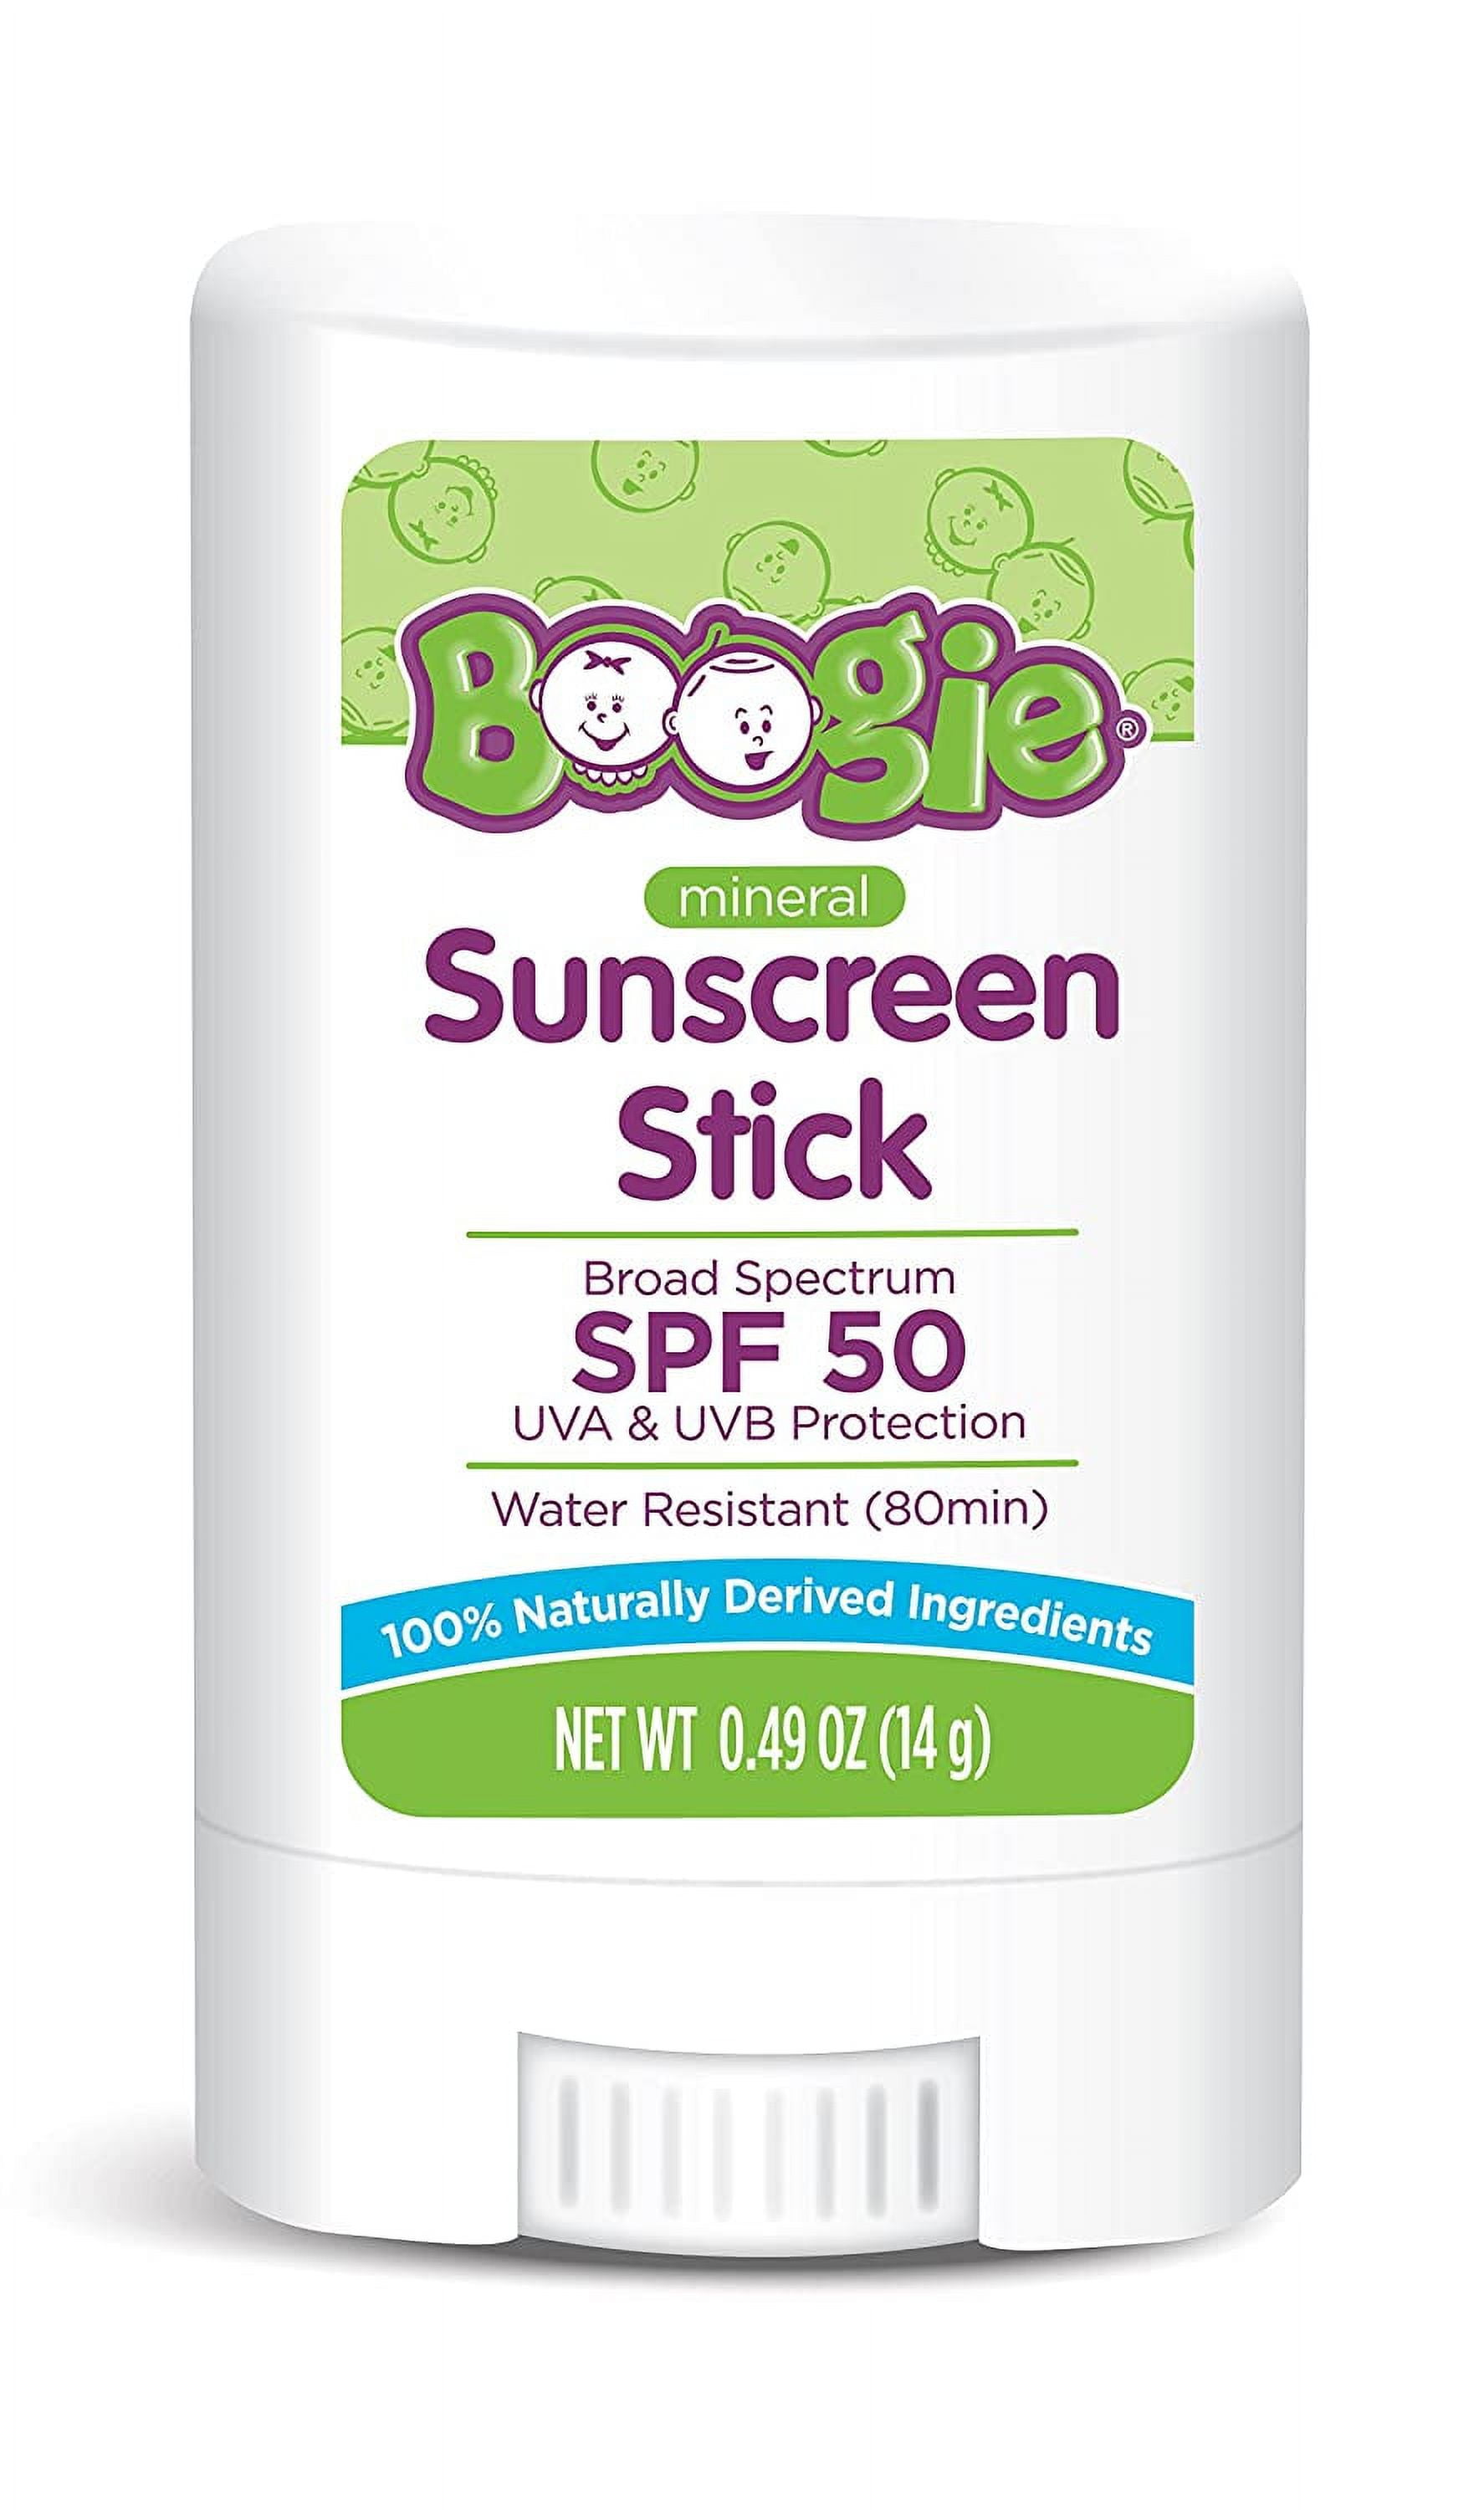 Brush on Block Bob Kids Mineral Sunscreen for Kids, Toddlers and Babies SPF 30